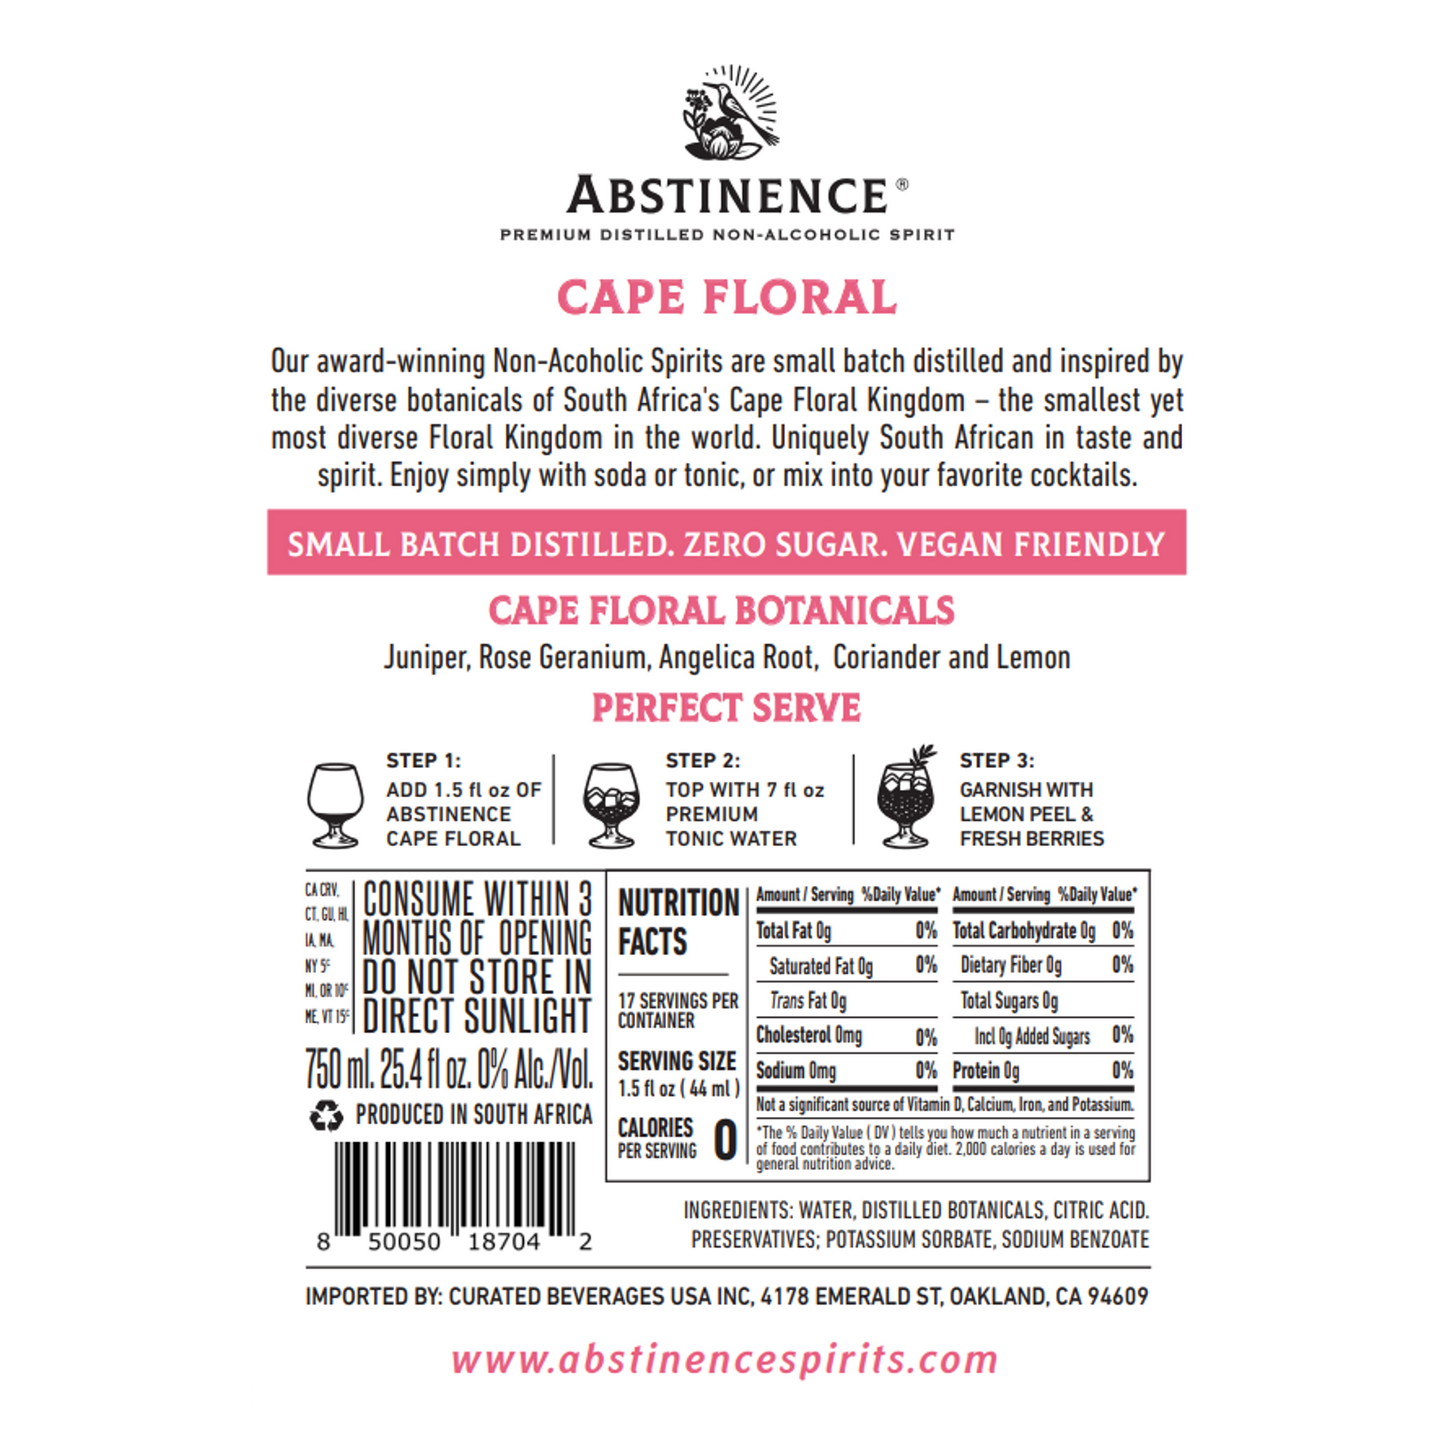 Abstinence Spirits 'Cape Floral' Non-Alcoholic Spirit, South Africa